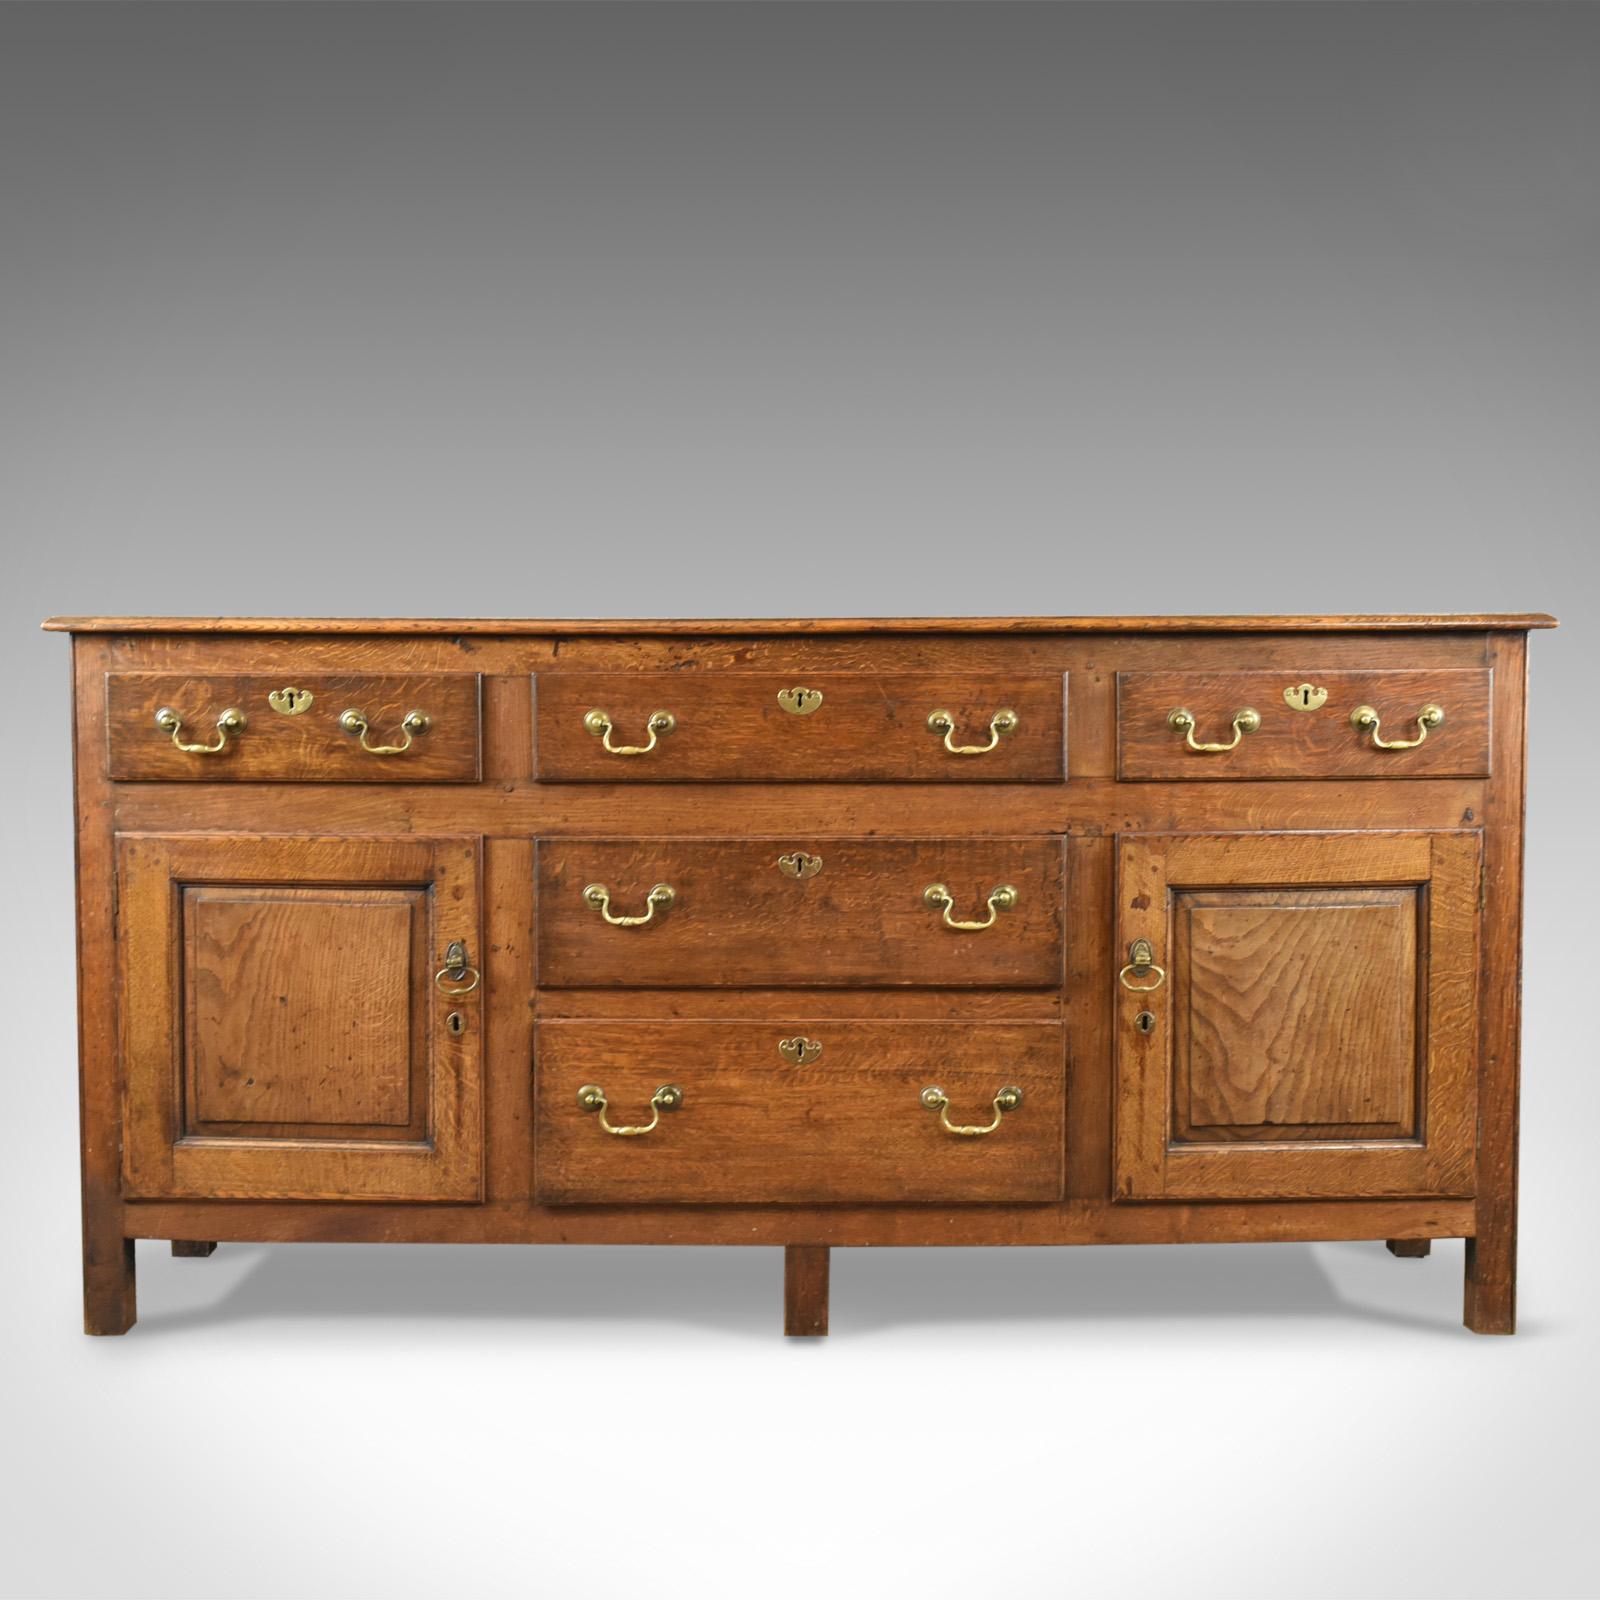 This is an antique dresser base, A Victorian, Georgian revival sideboard in English oak dating to circa 1880.

Of quality craftsmanship in stout stocks of English oak
Displaying grain interest highlighted with wisps of medullary rays
In honey